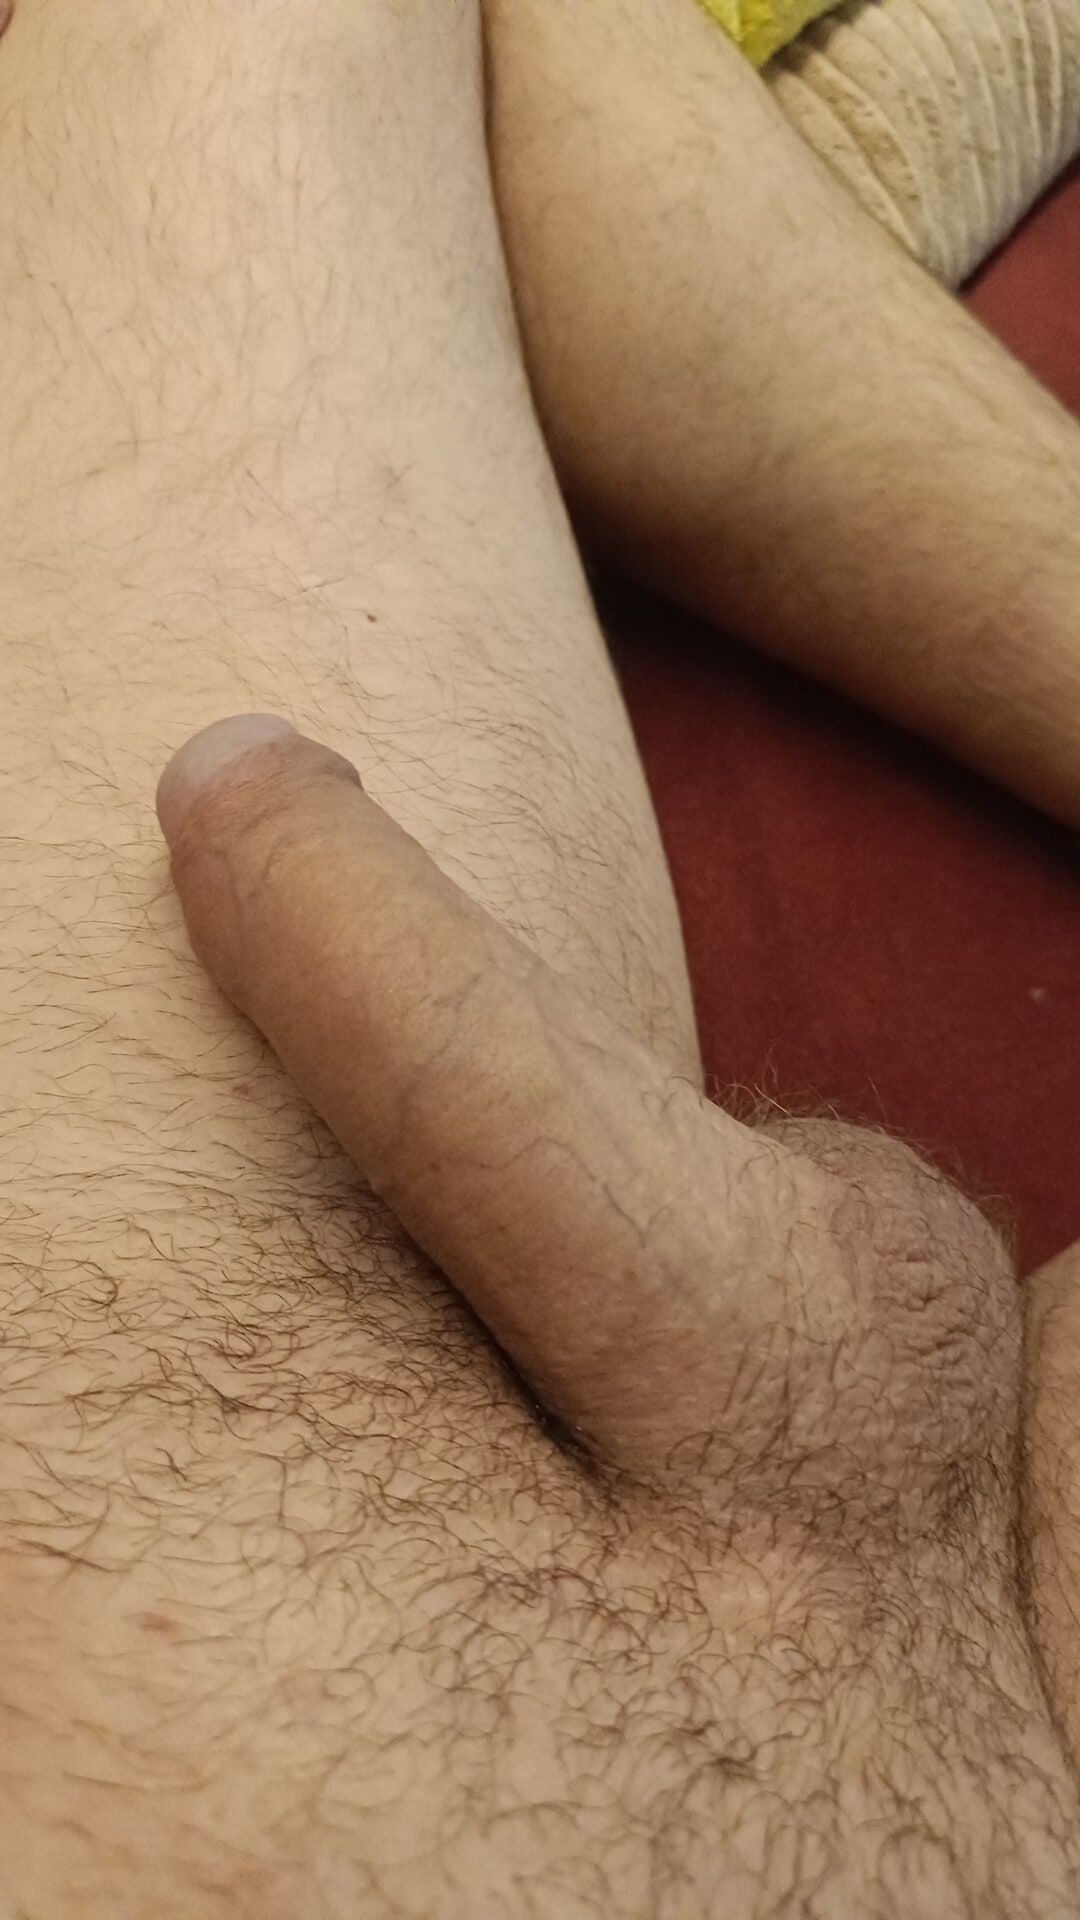 Me playing with my dick #6